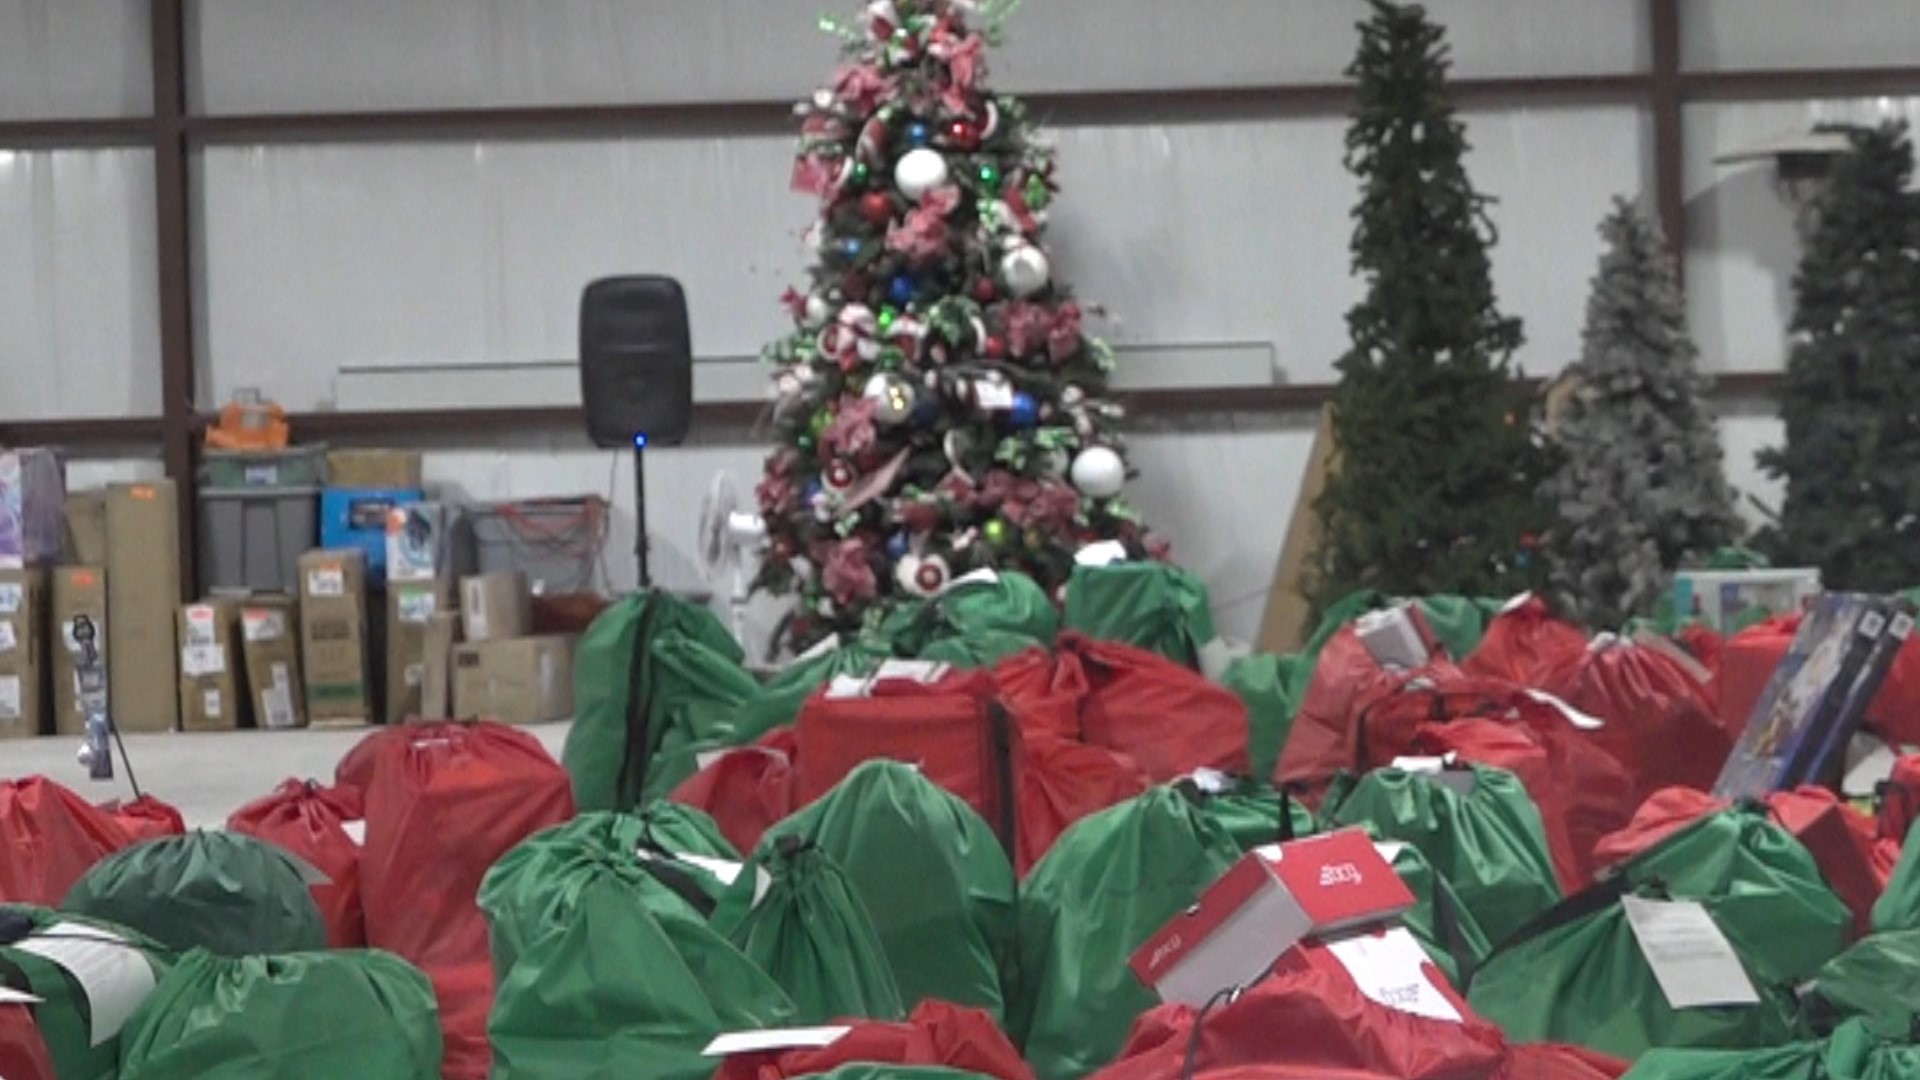 3:11 Ministries is gifting kids clothes, toys, toiletries and more this Christmas.